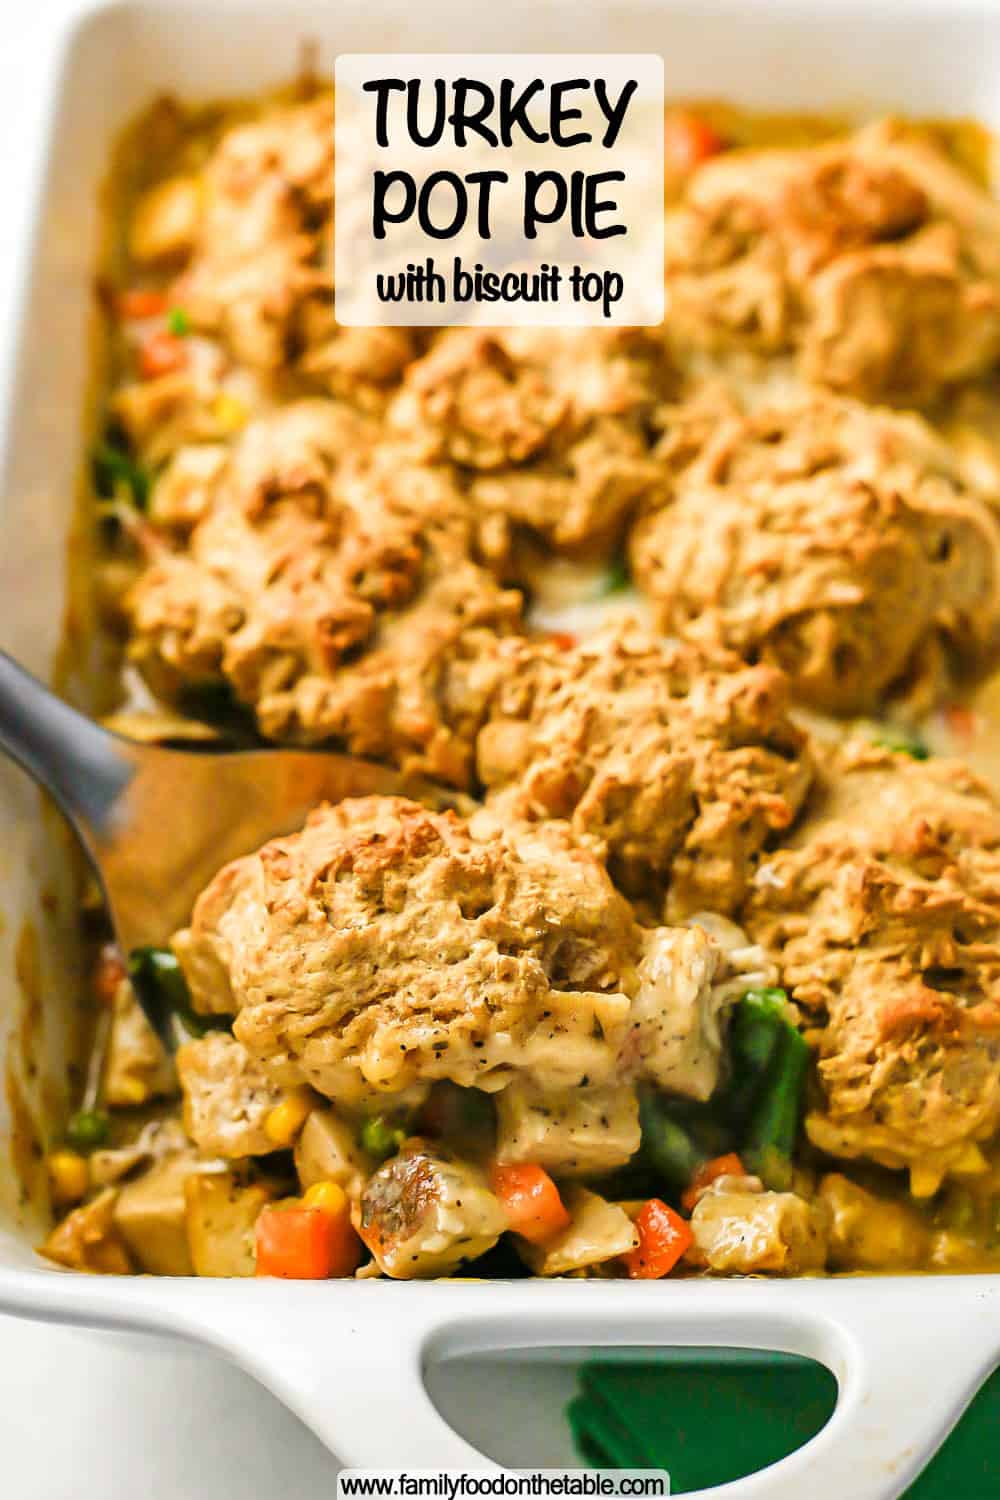 Close up of a scoop of turkey pot pie with a biscuit on top being taken from a white rectangular casserole dish with a text overlay on the image